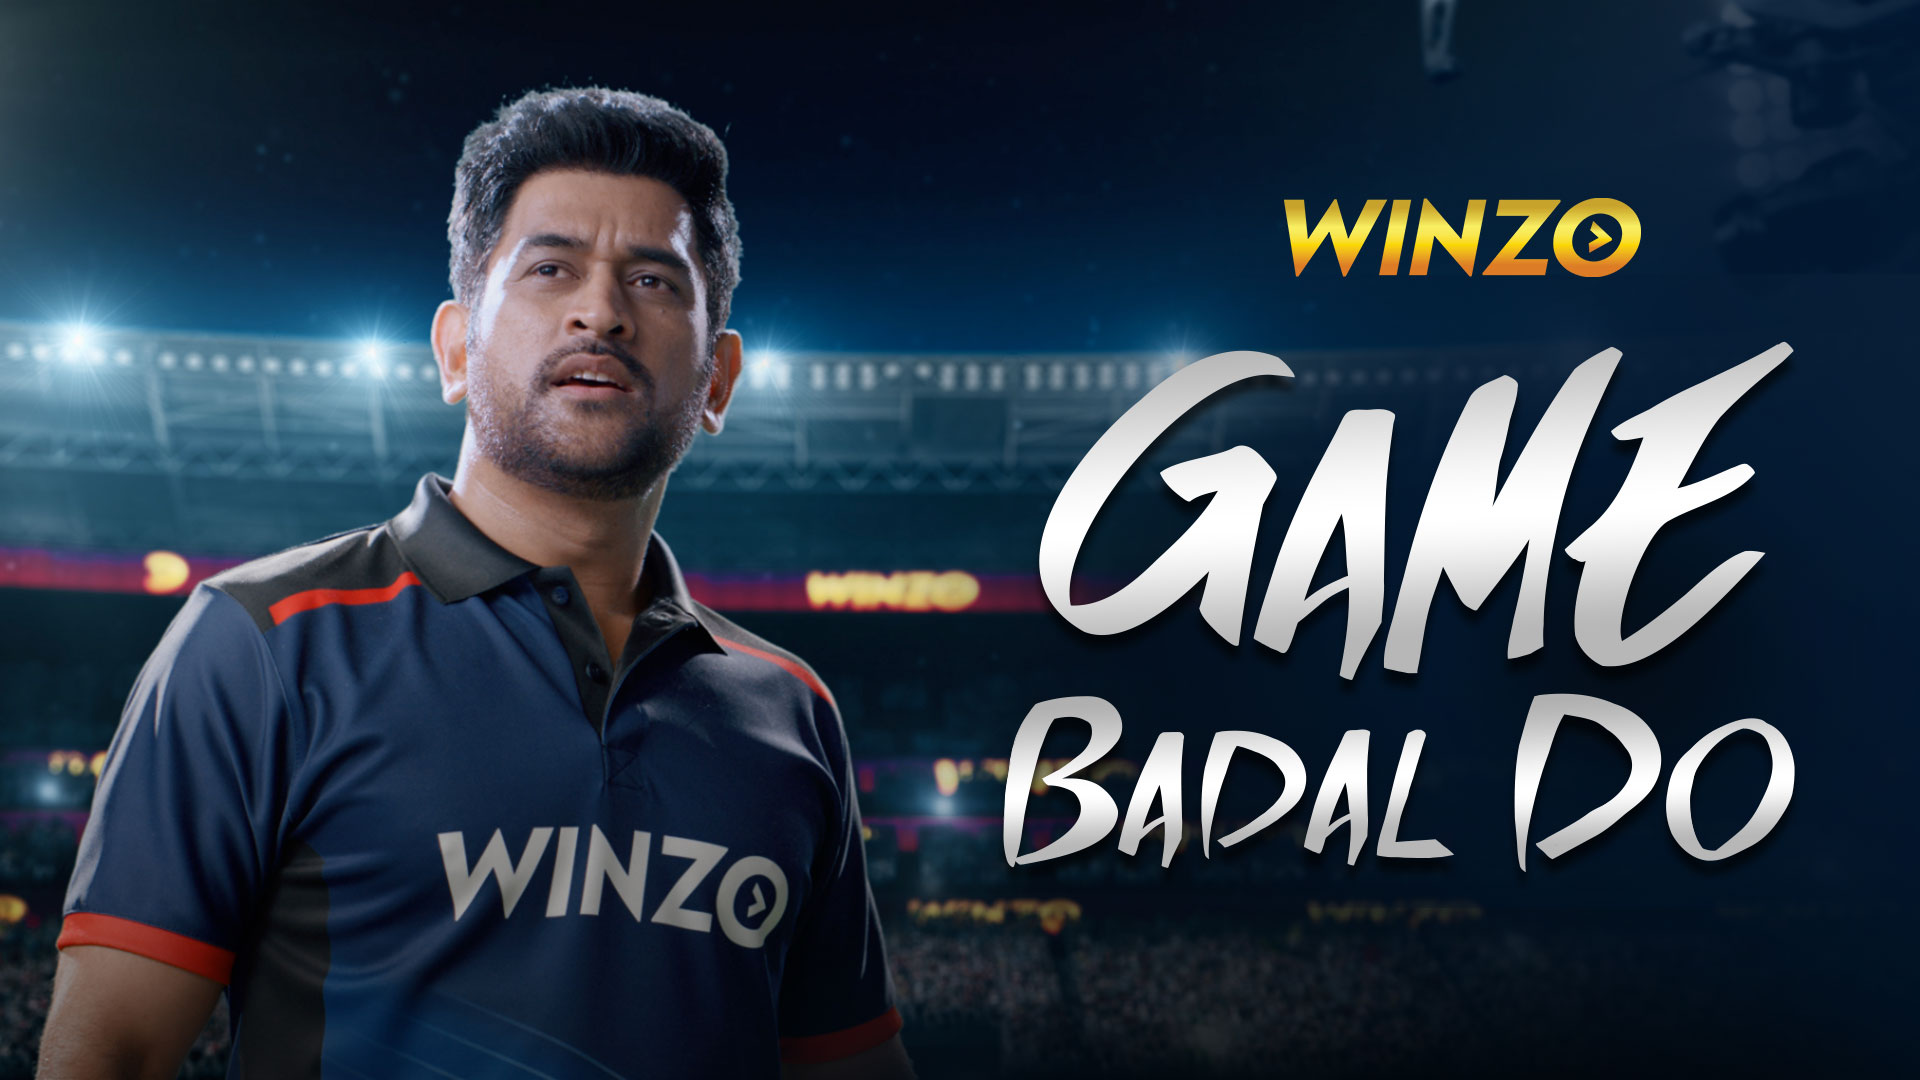 You are currently viewing Dhoni and Piyush Pandey bat for WinZO, say ‘Game Badal Do’ in their newest campaign